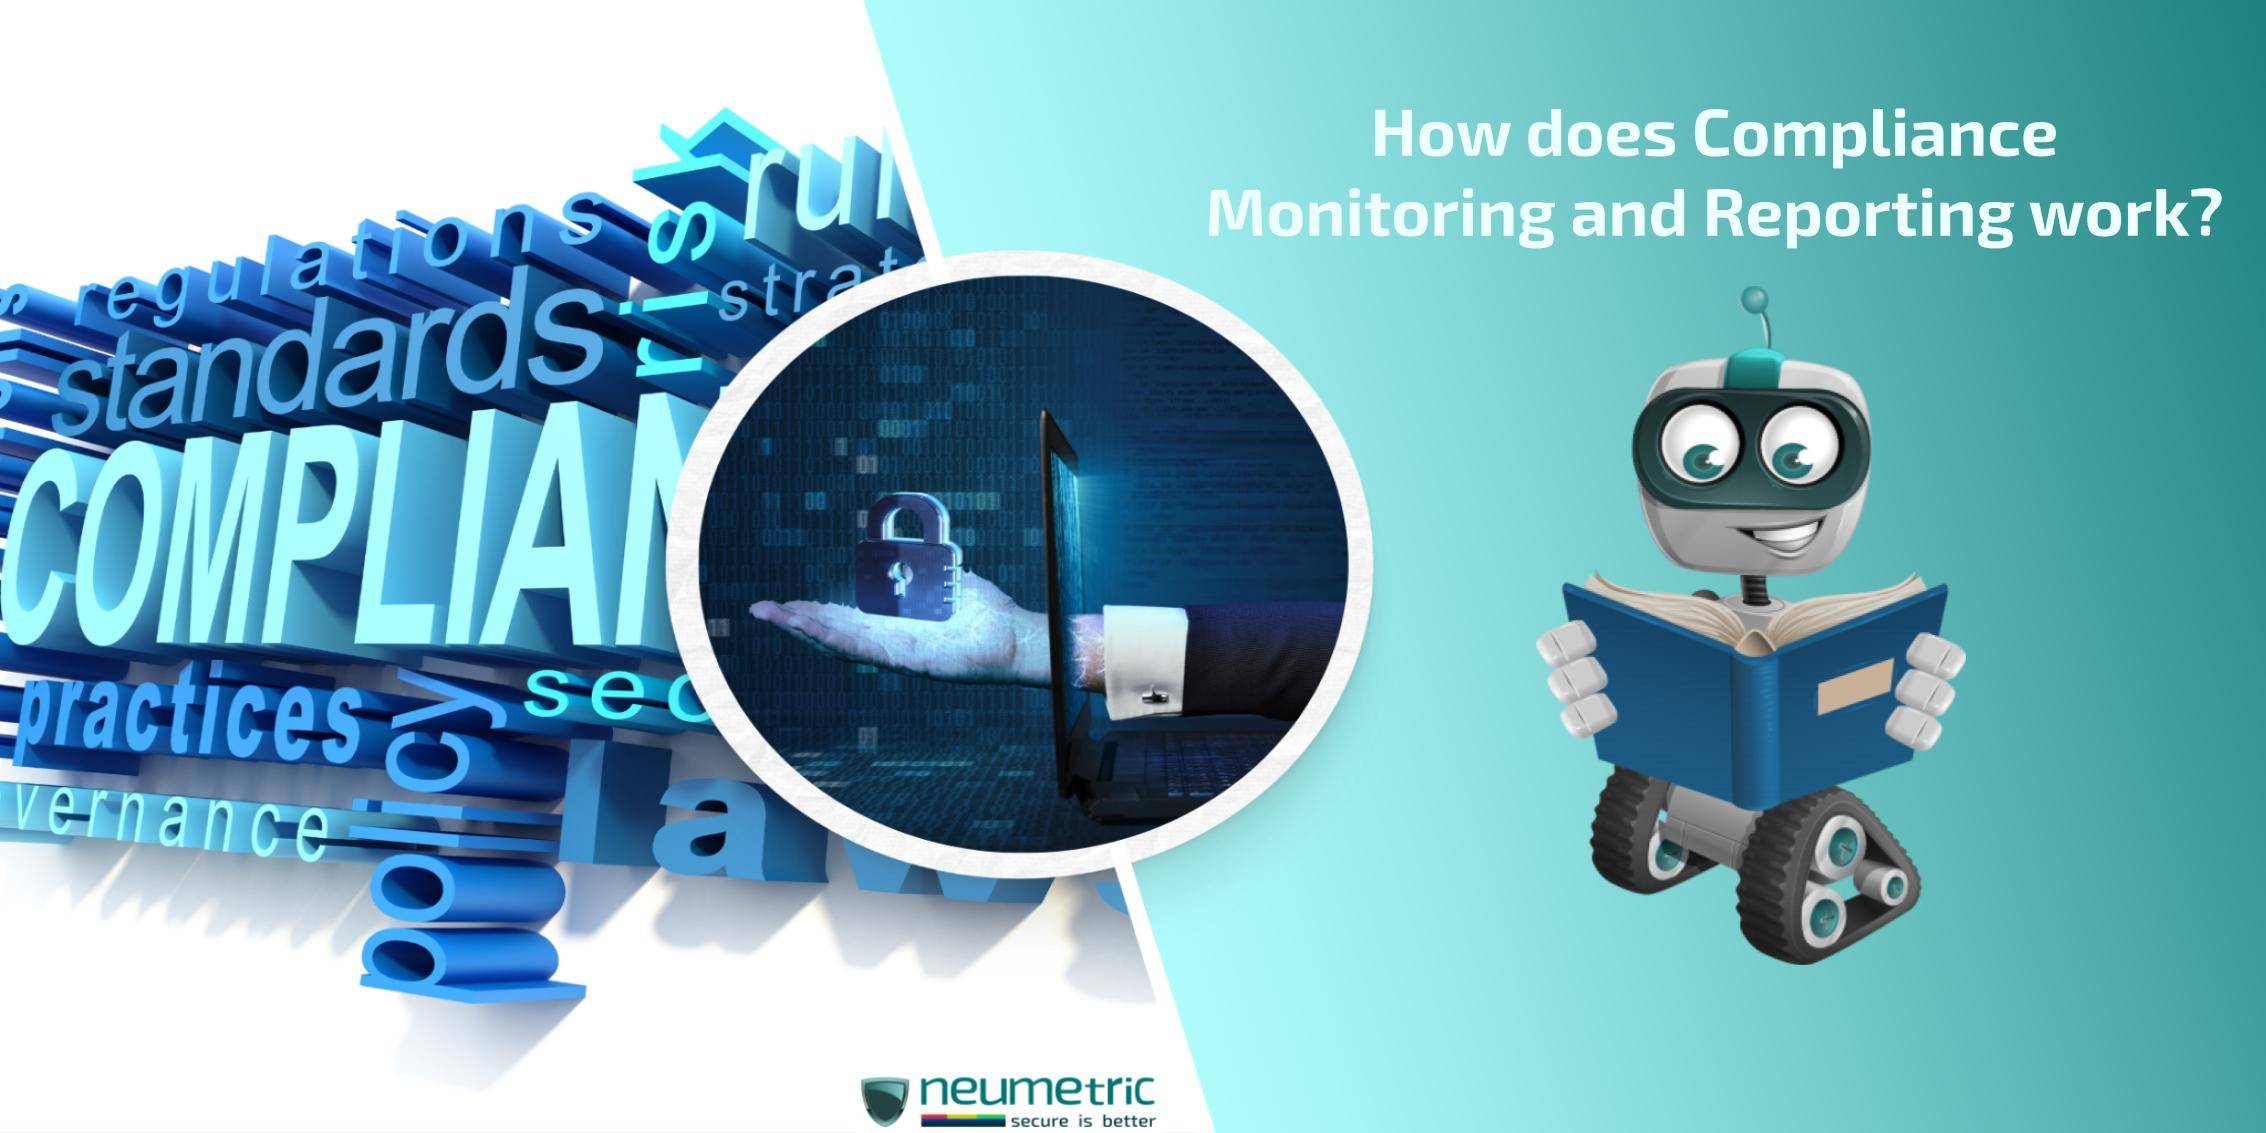 How does Compliance Monitoring and Reporting work?